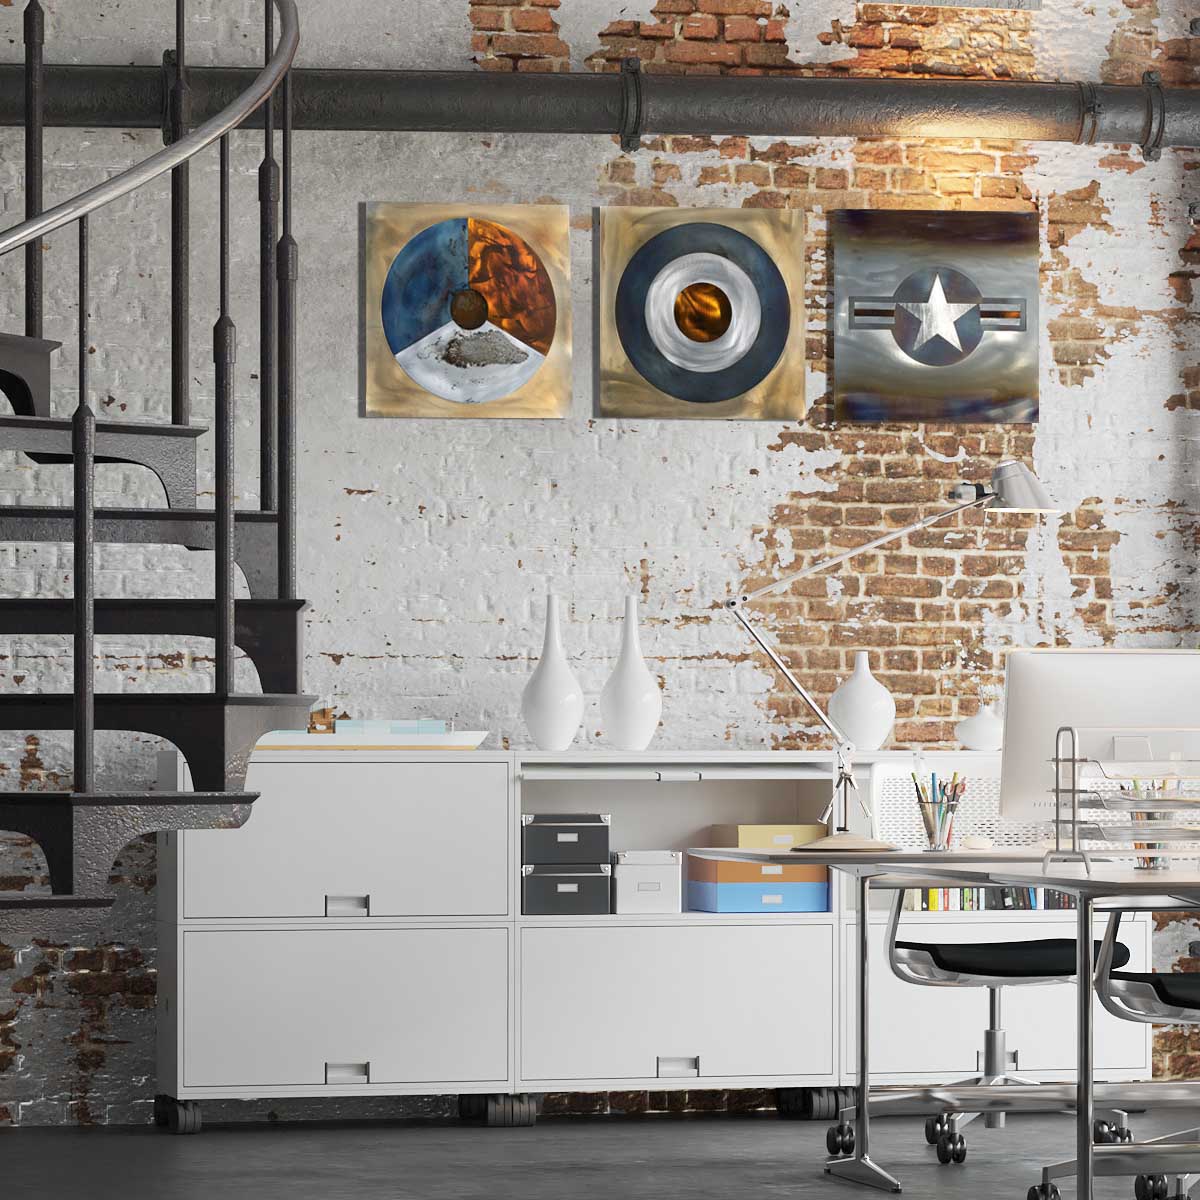 For sale: three steel roundel artworks in an old vintage brick office.